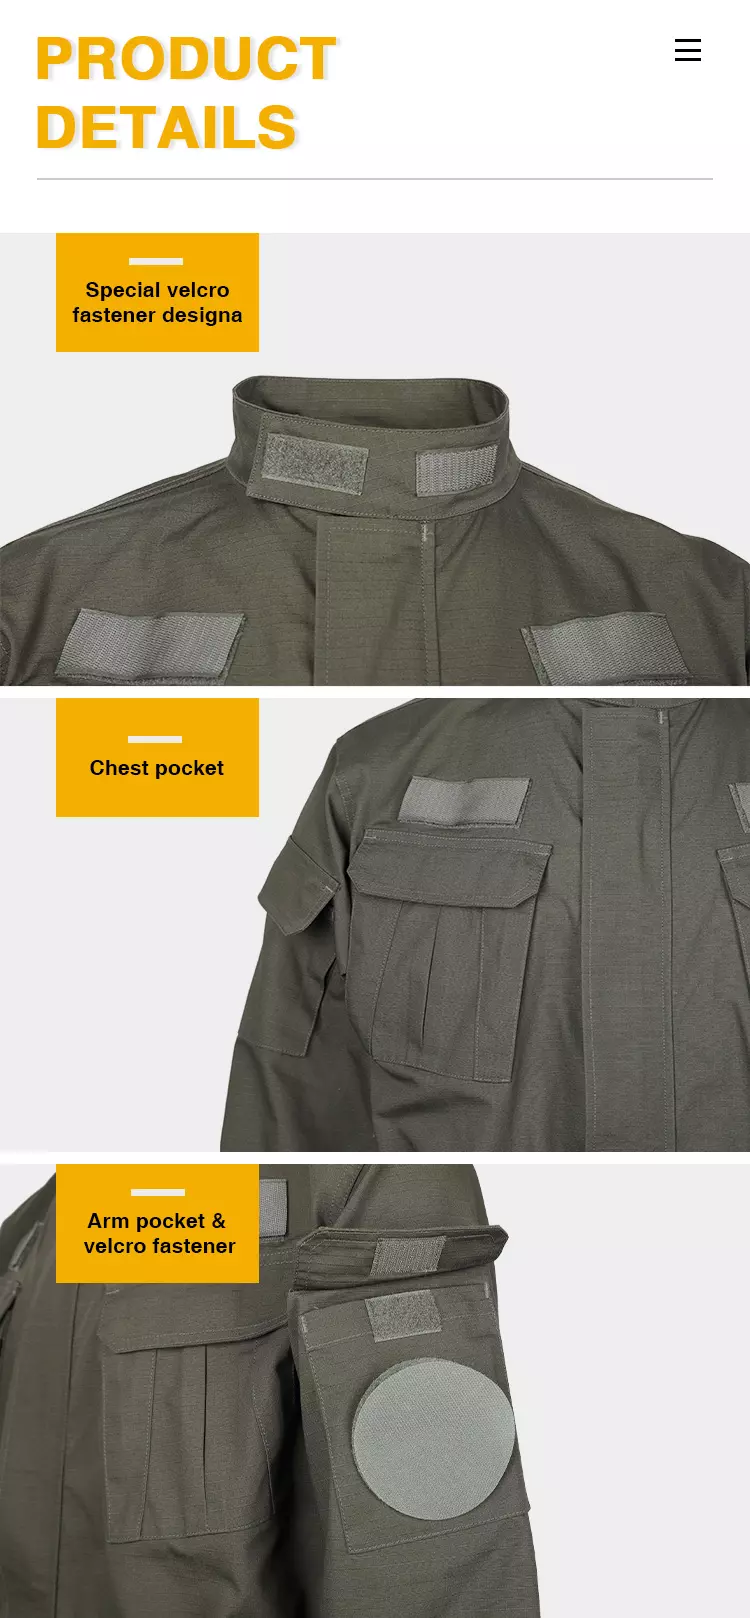 Military Tranning Coverall